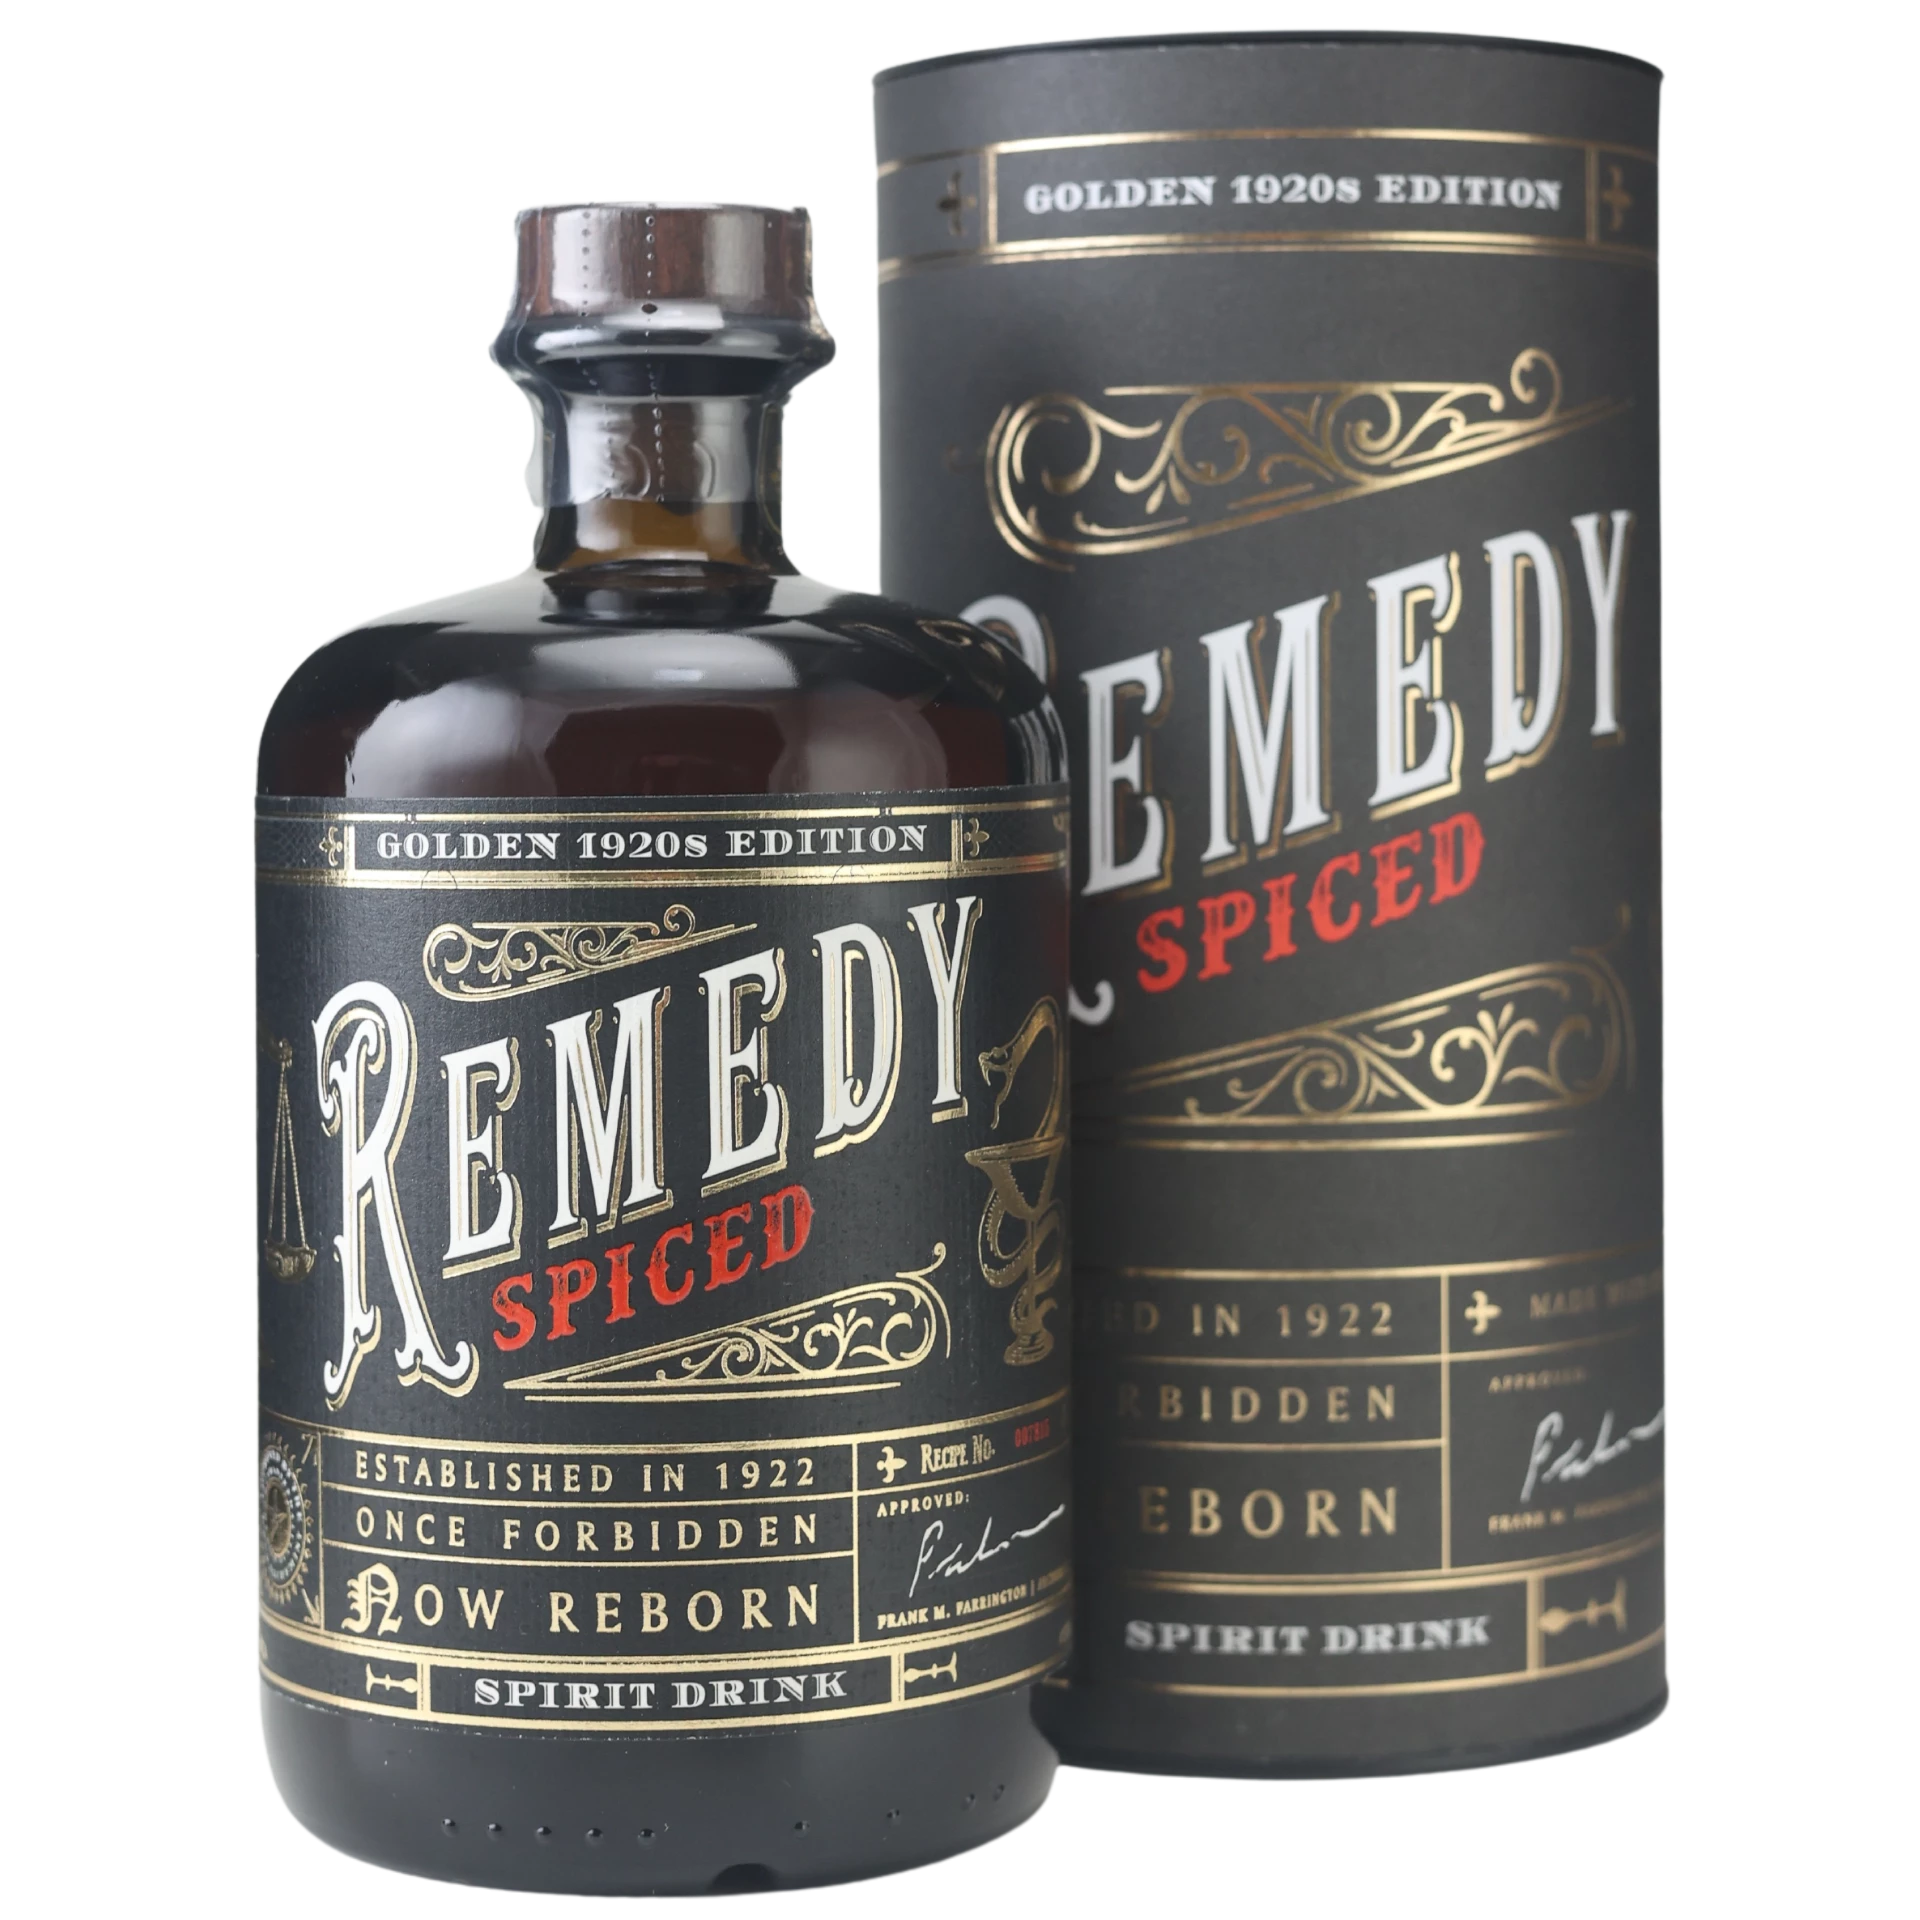 Basis) Golden Spiced 0,7l 20´s Remedy 41,5% Edition (Rum